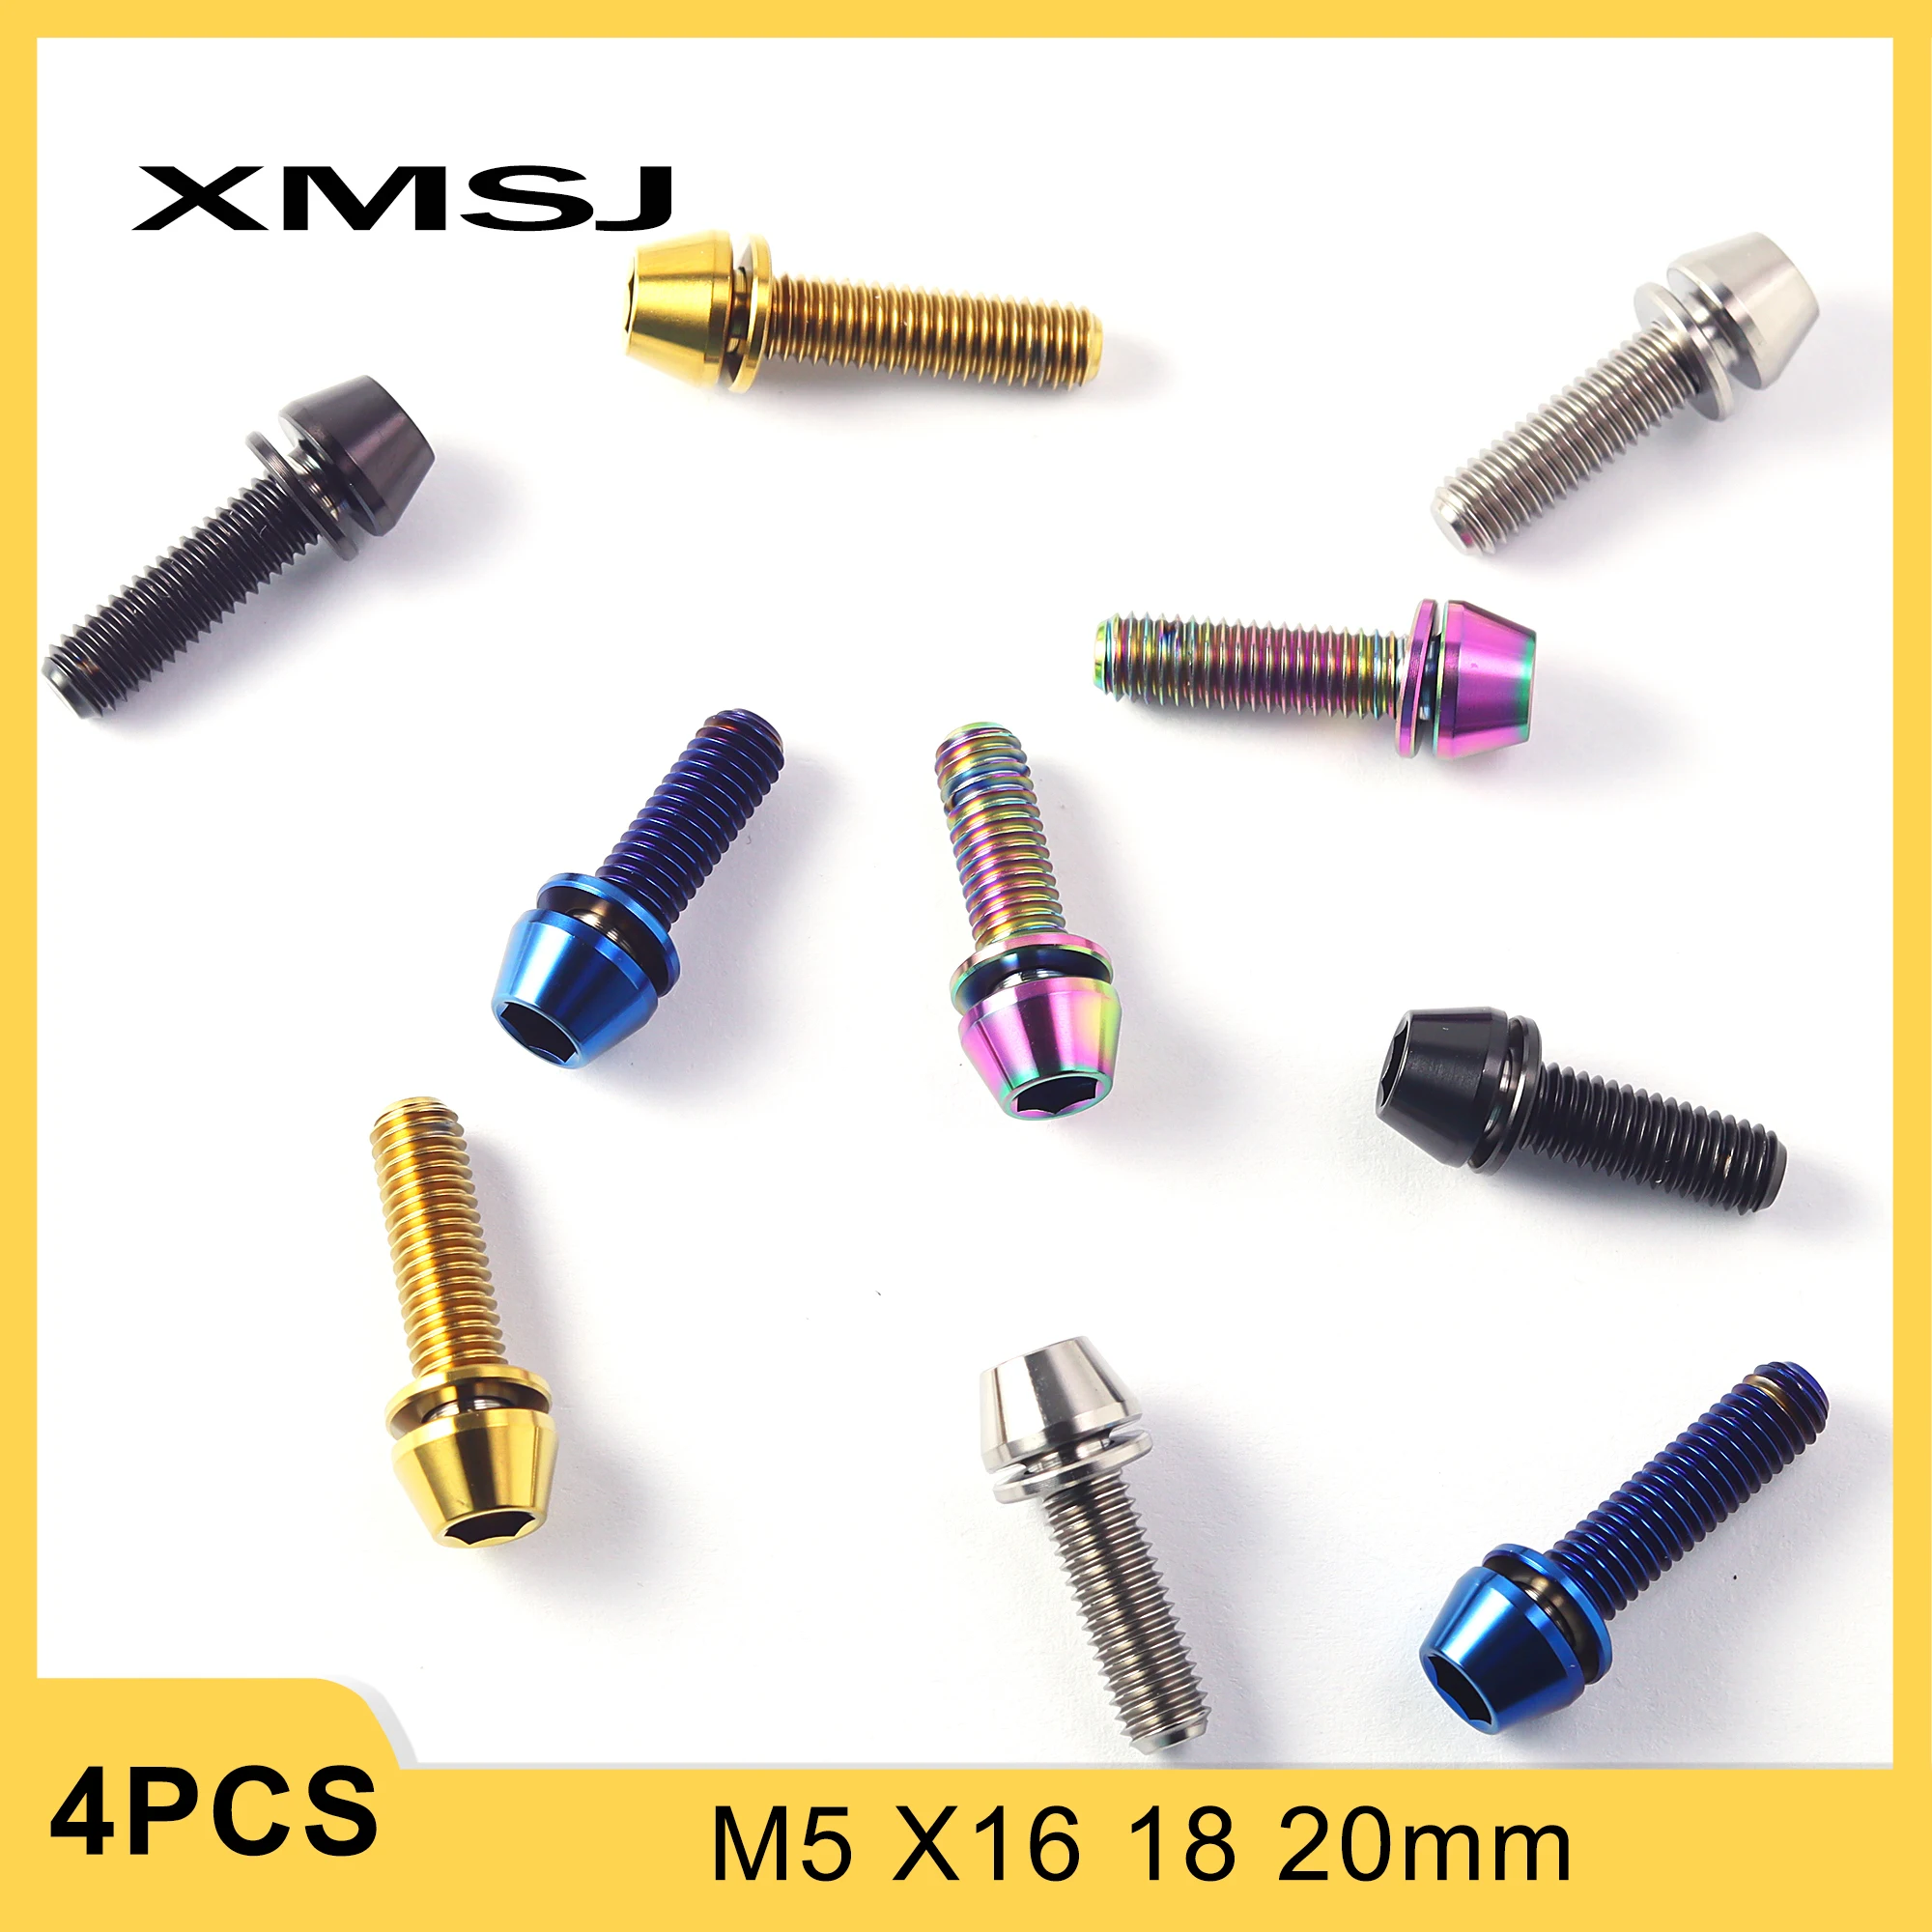 

XMSJ Bicycle Handlebar Stem Fixing Bolts For Front Back Derailleur Seatpost Clamp M5*16/18/20mm Bike Stem Screw Clamp Parts